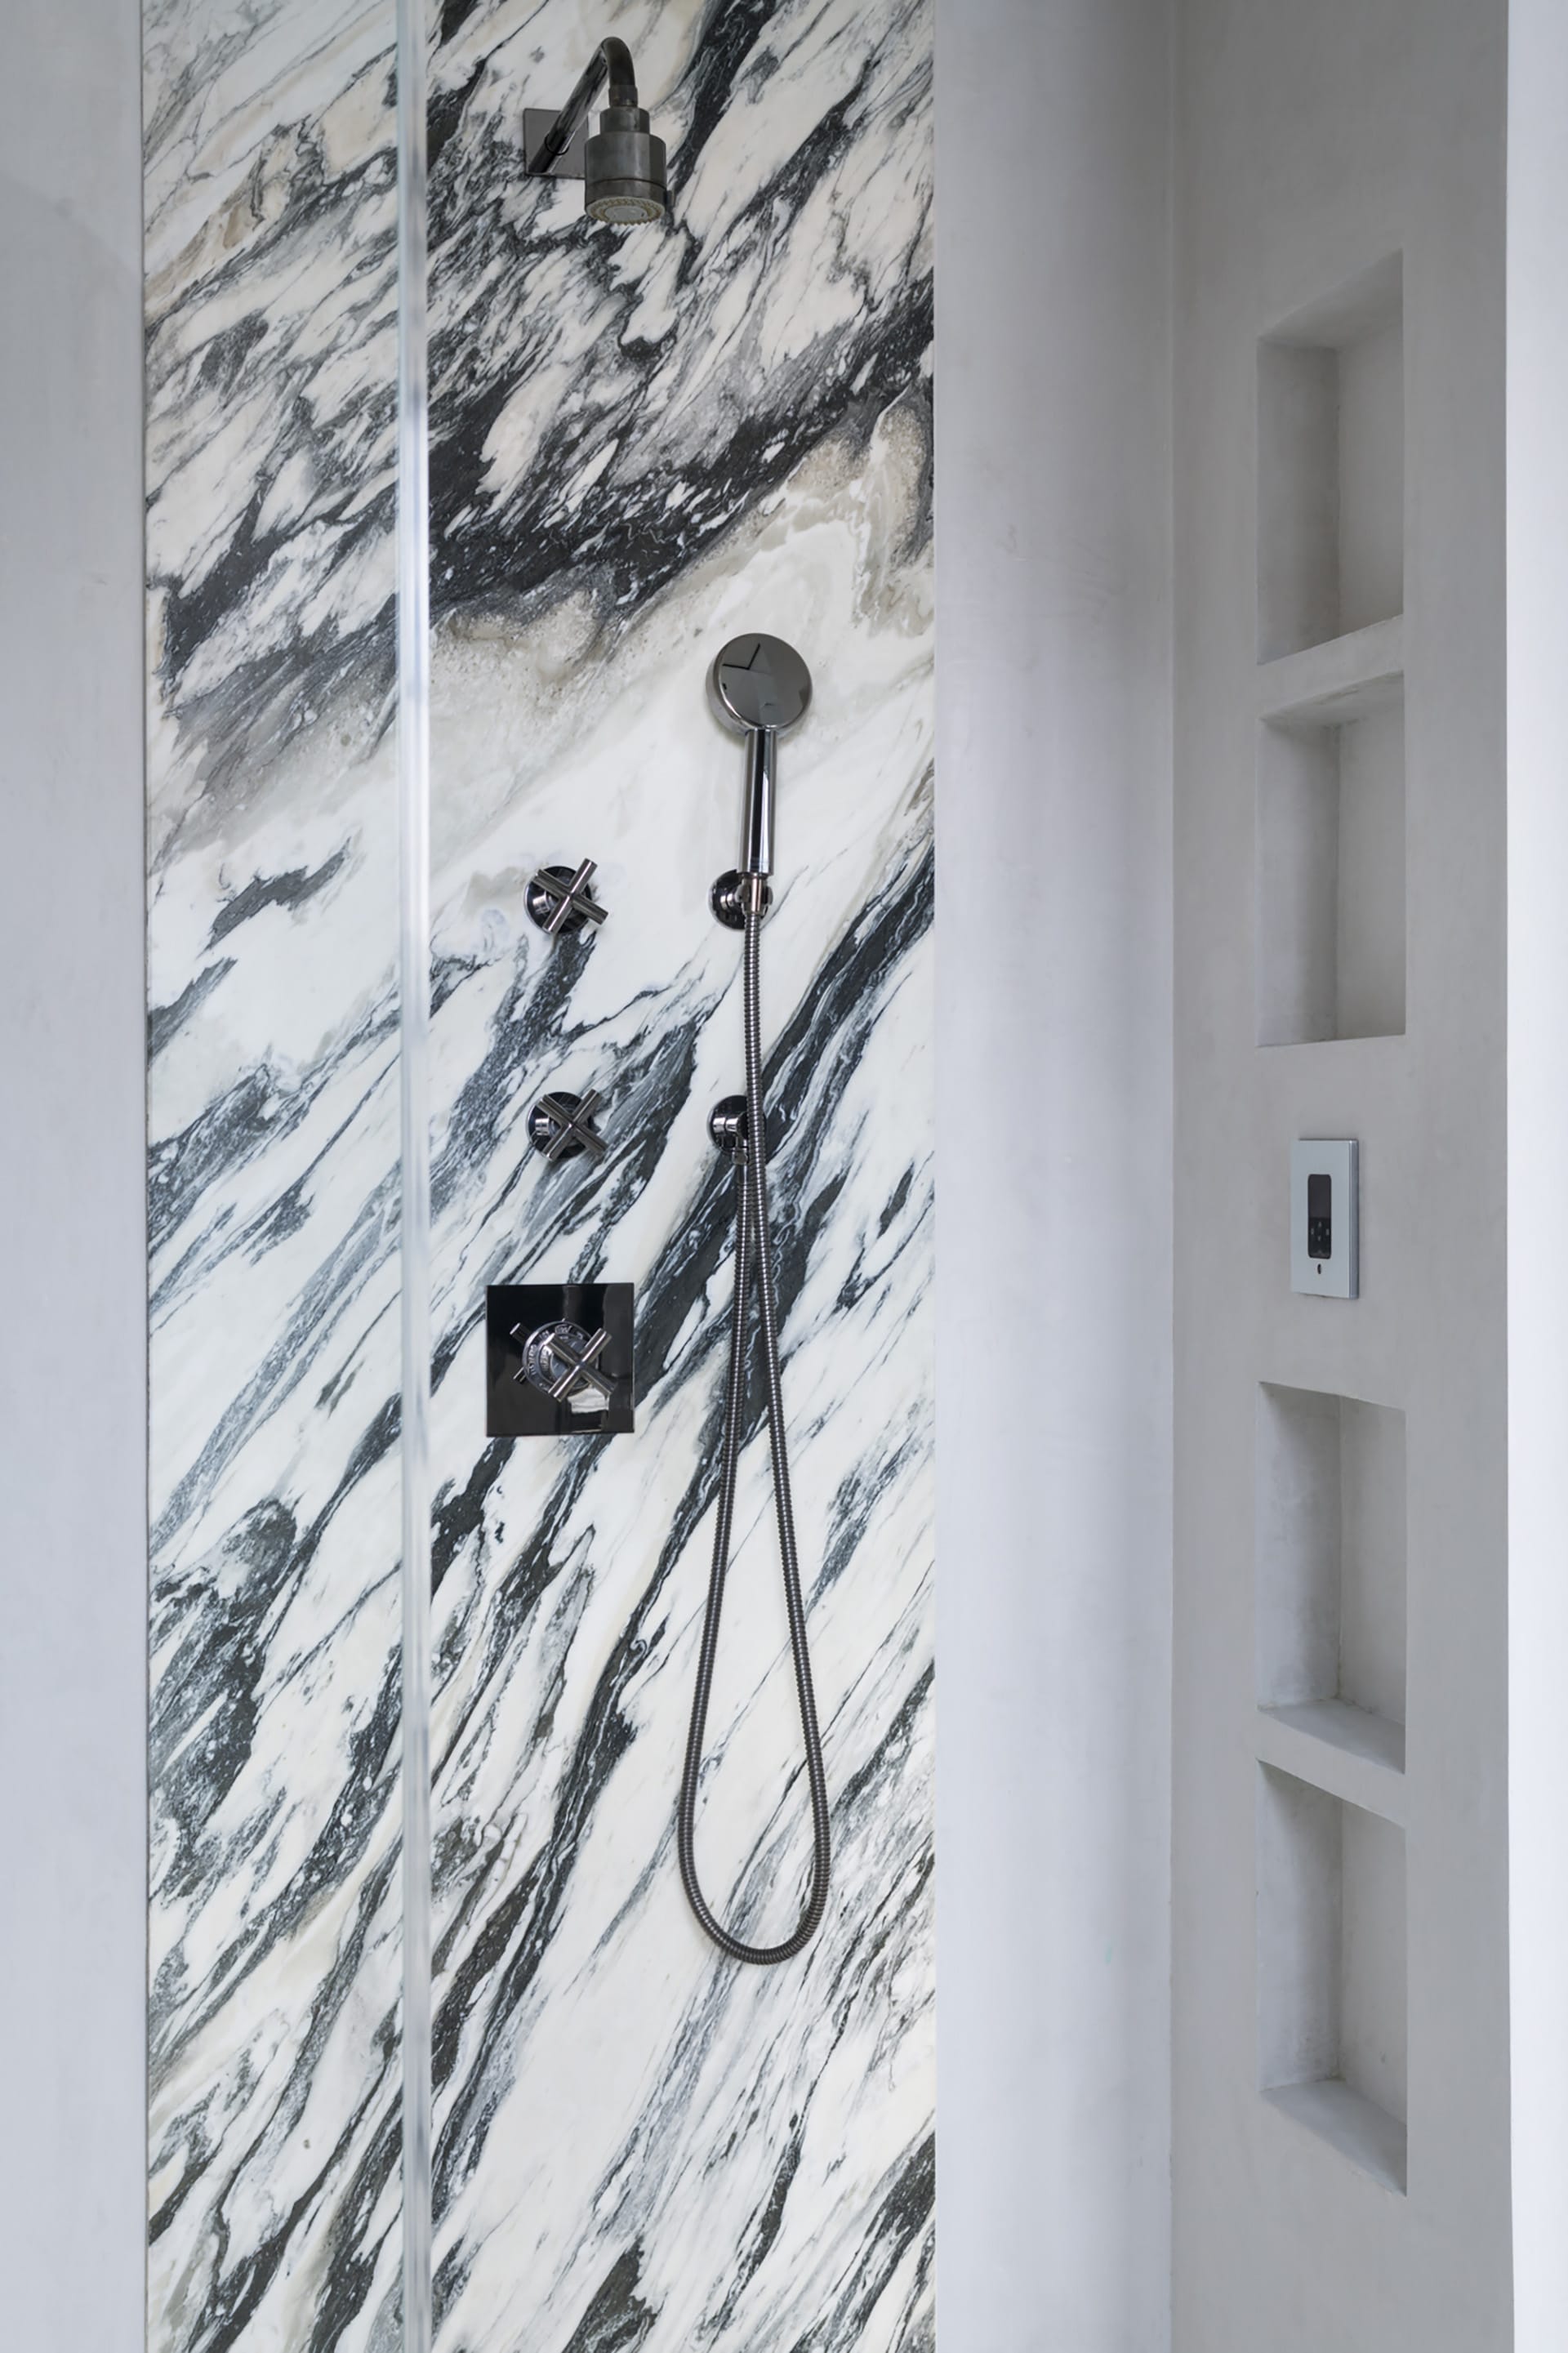 Primary bath with black and white marble wall in the shower.